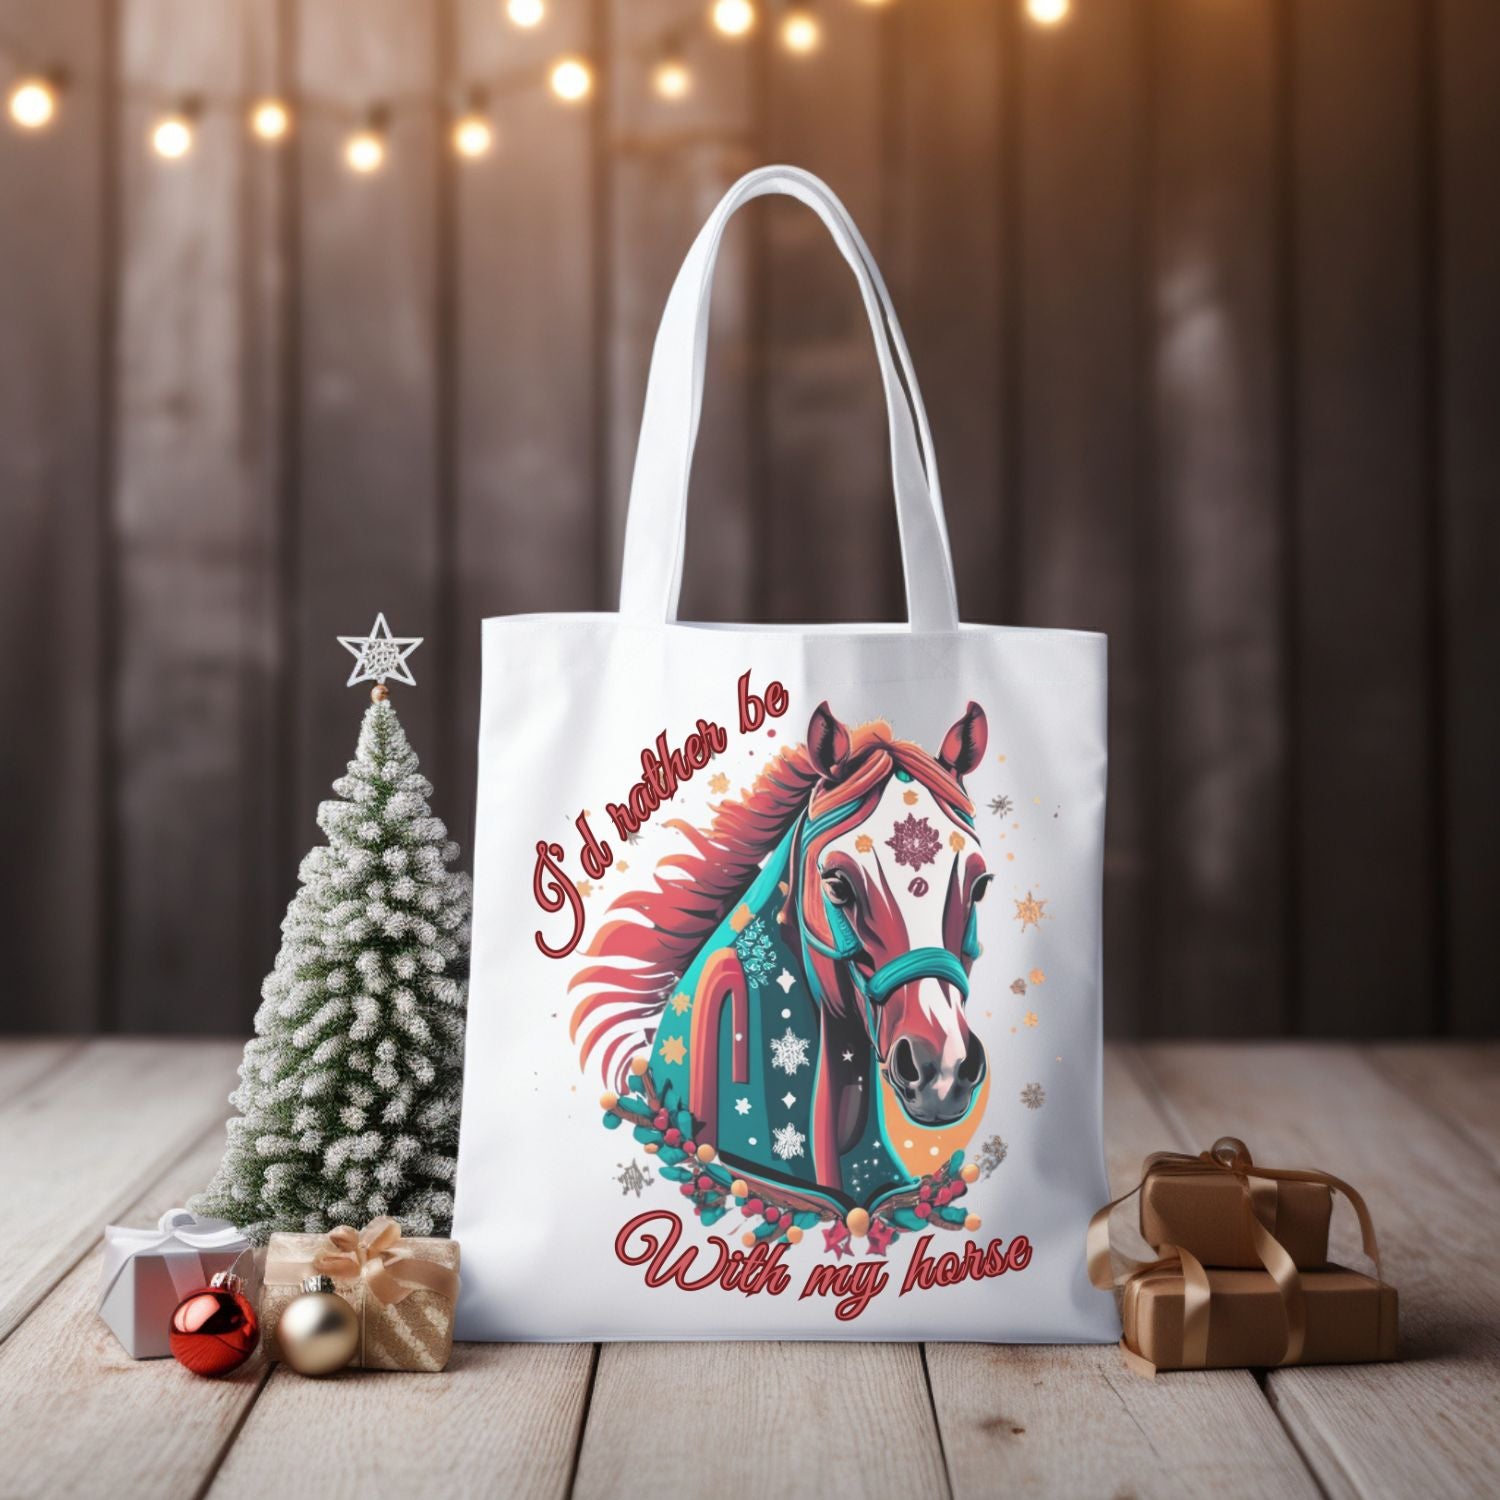 Horse Trainer Tote, Horse Lover Bag, Gift Tote Bag, Equestrian Gift, 'I'd Rather Be with My Horse' - Carry Your Passion with this Tote for Horse Enthusiasts Accessories   